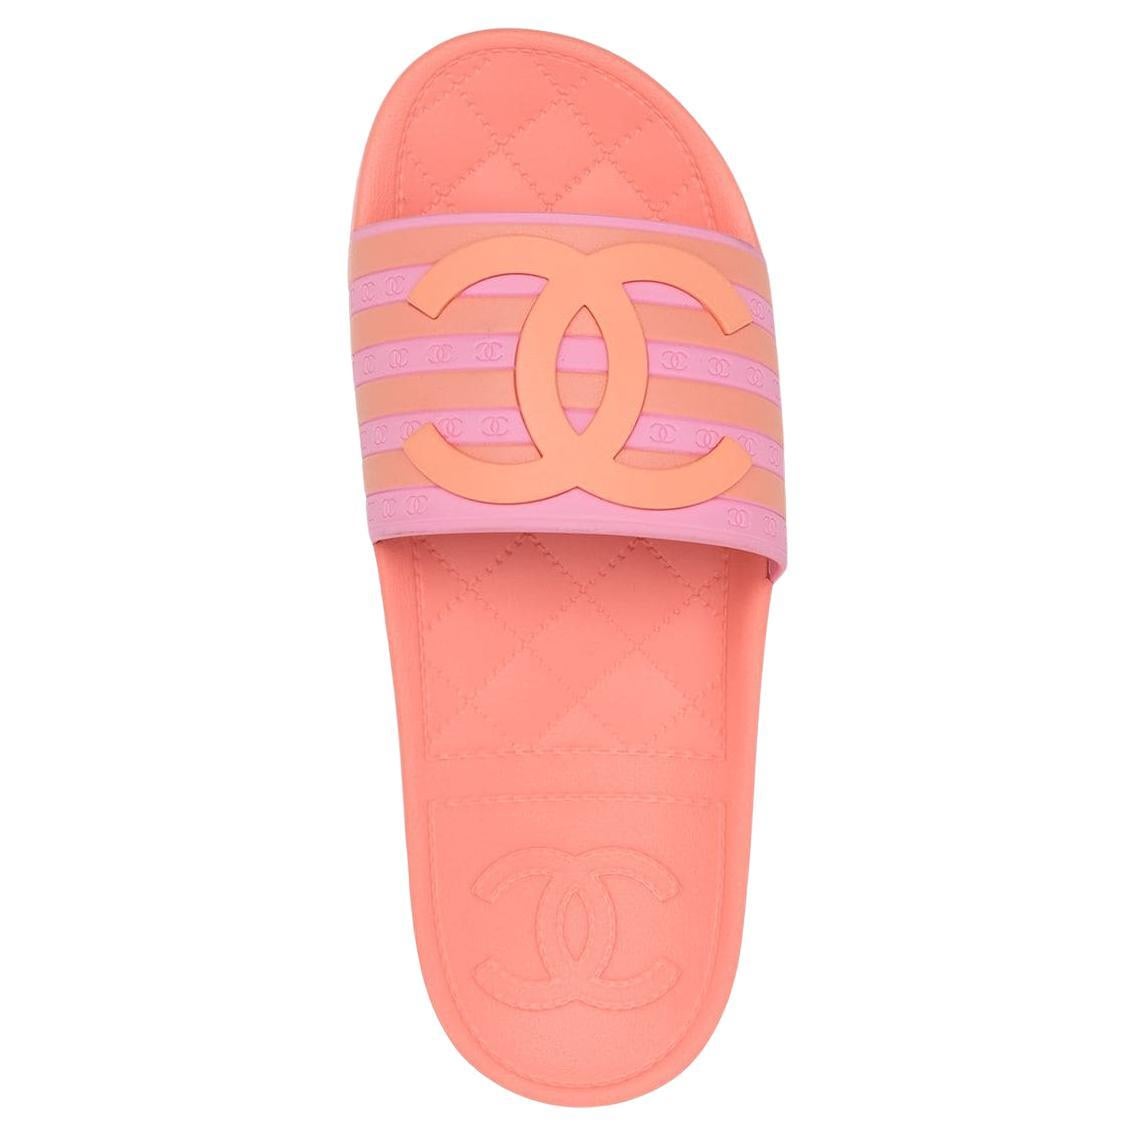 Chanel 2018 Cruise Resort Pink Peach Orange Rubber Sandals Slides 41 New in Box For Sale